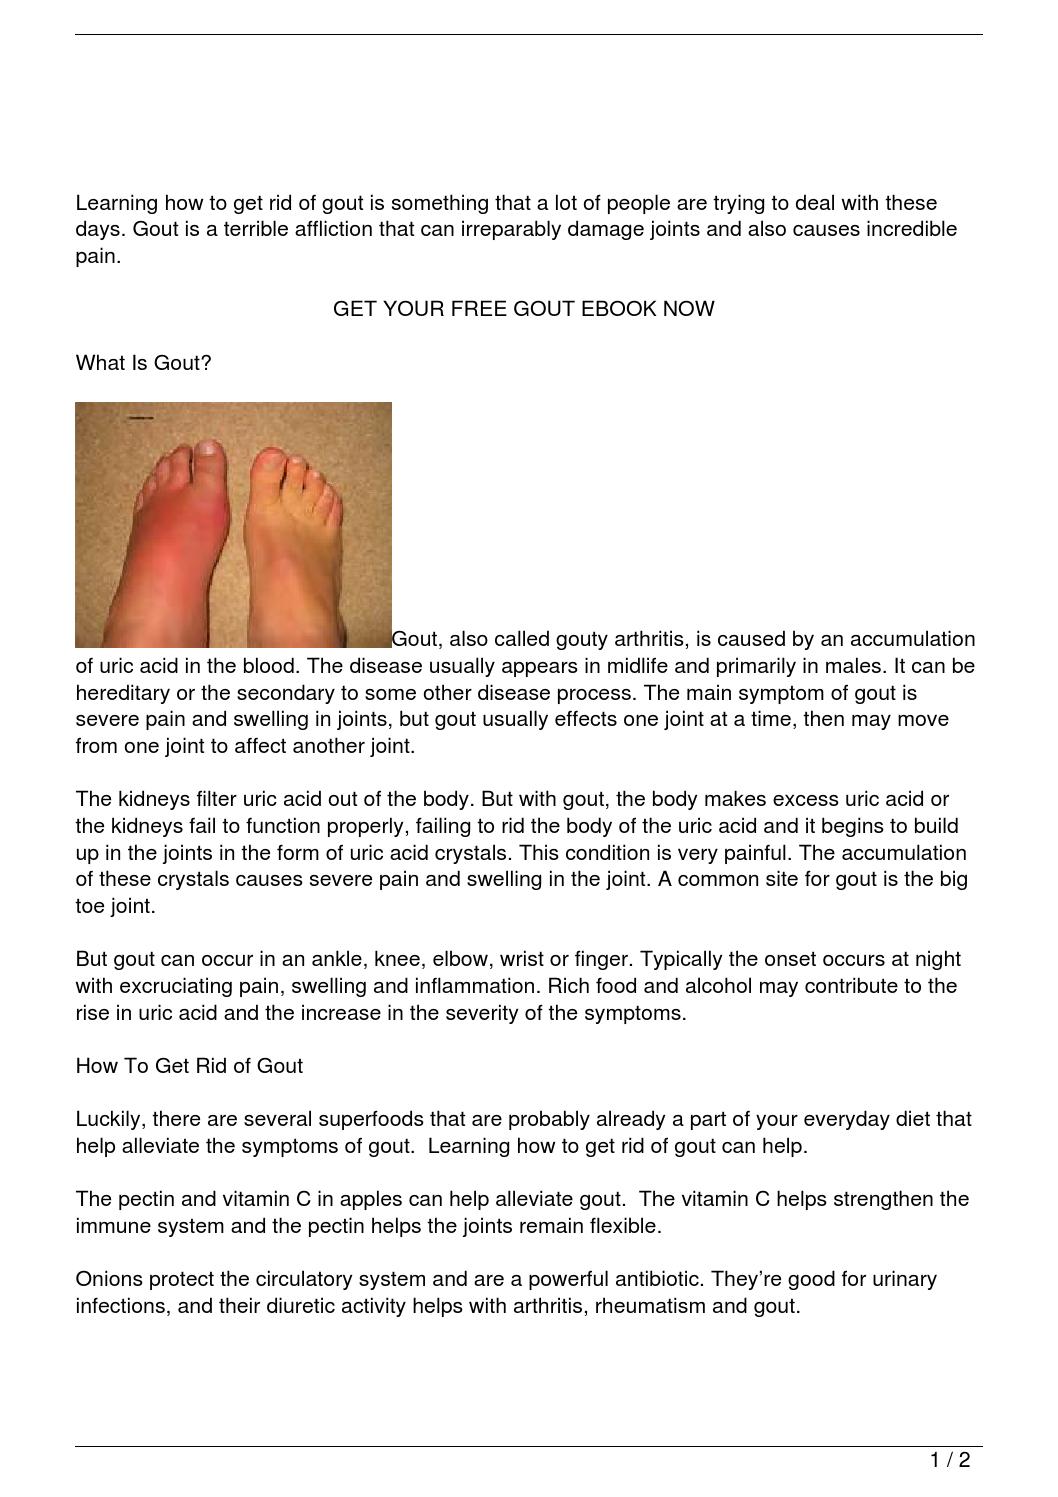 How To Get Rid of Gout by stacy cooper